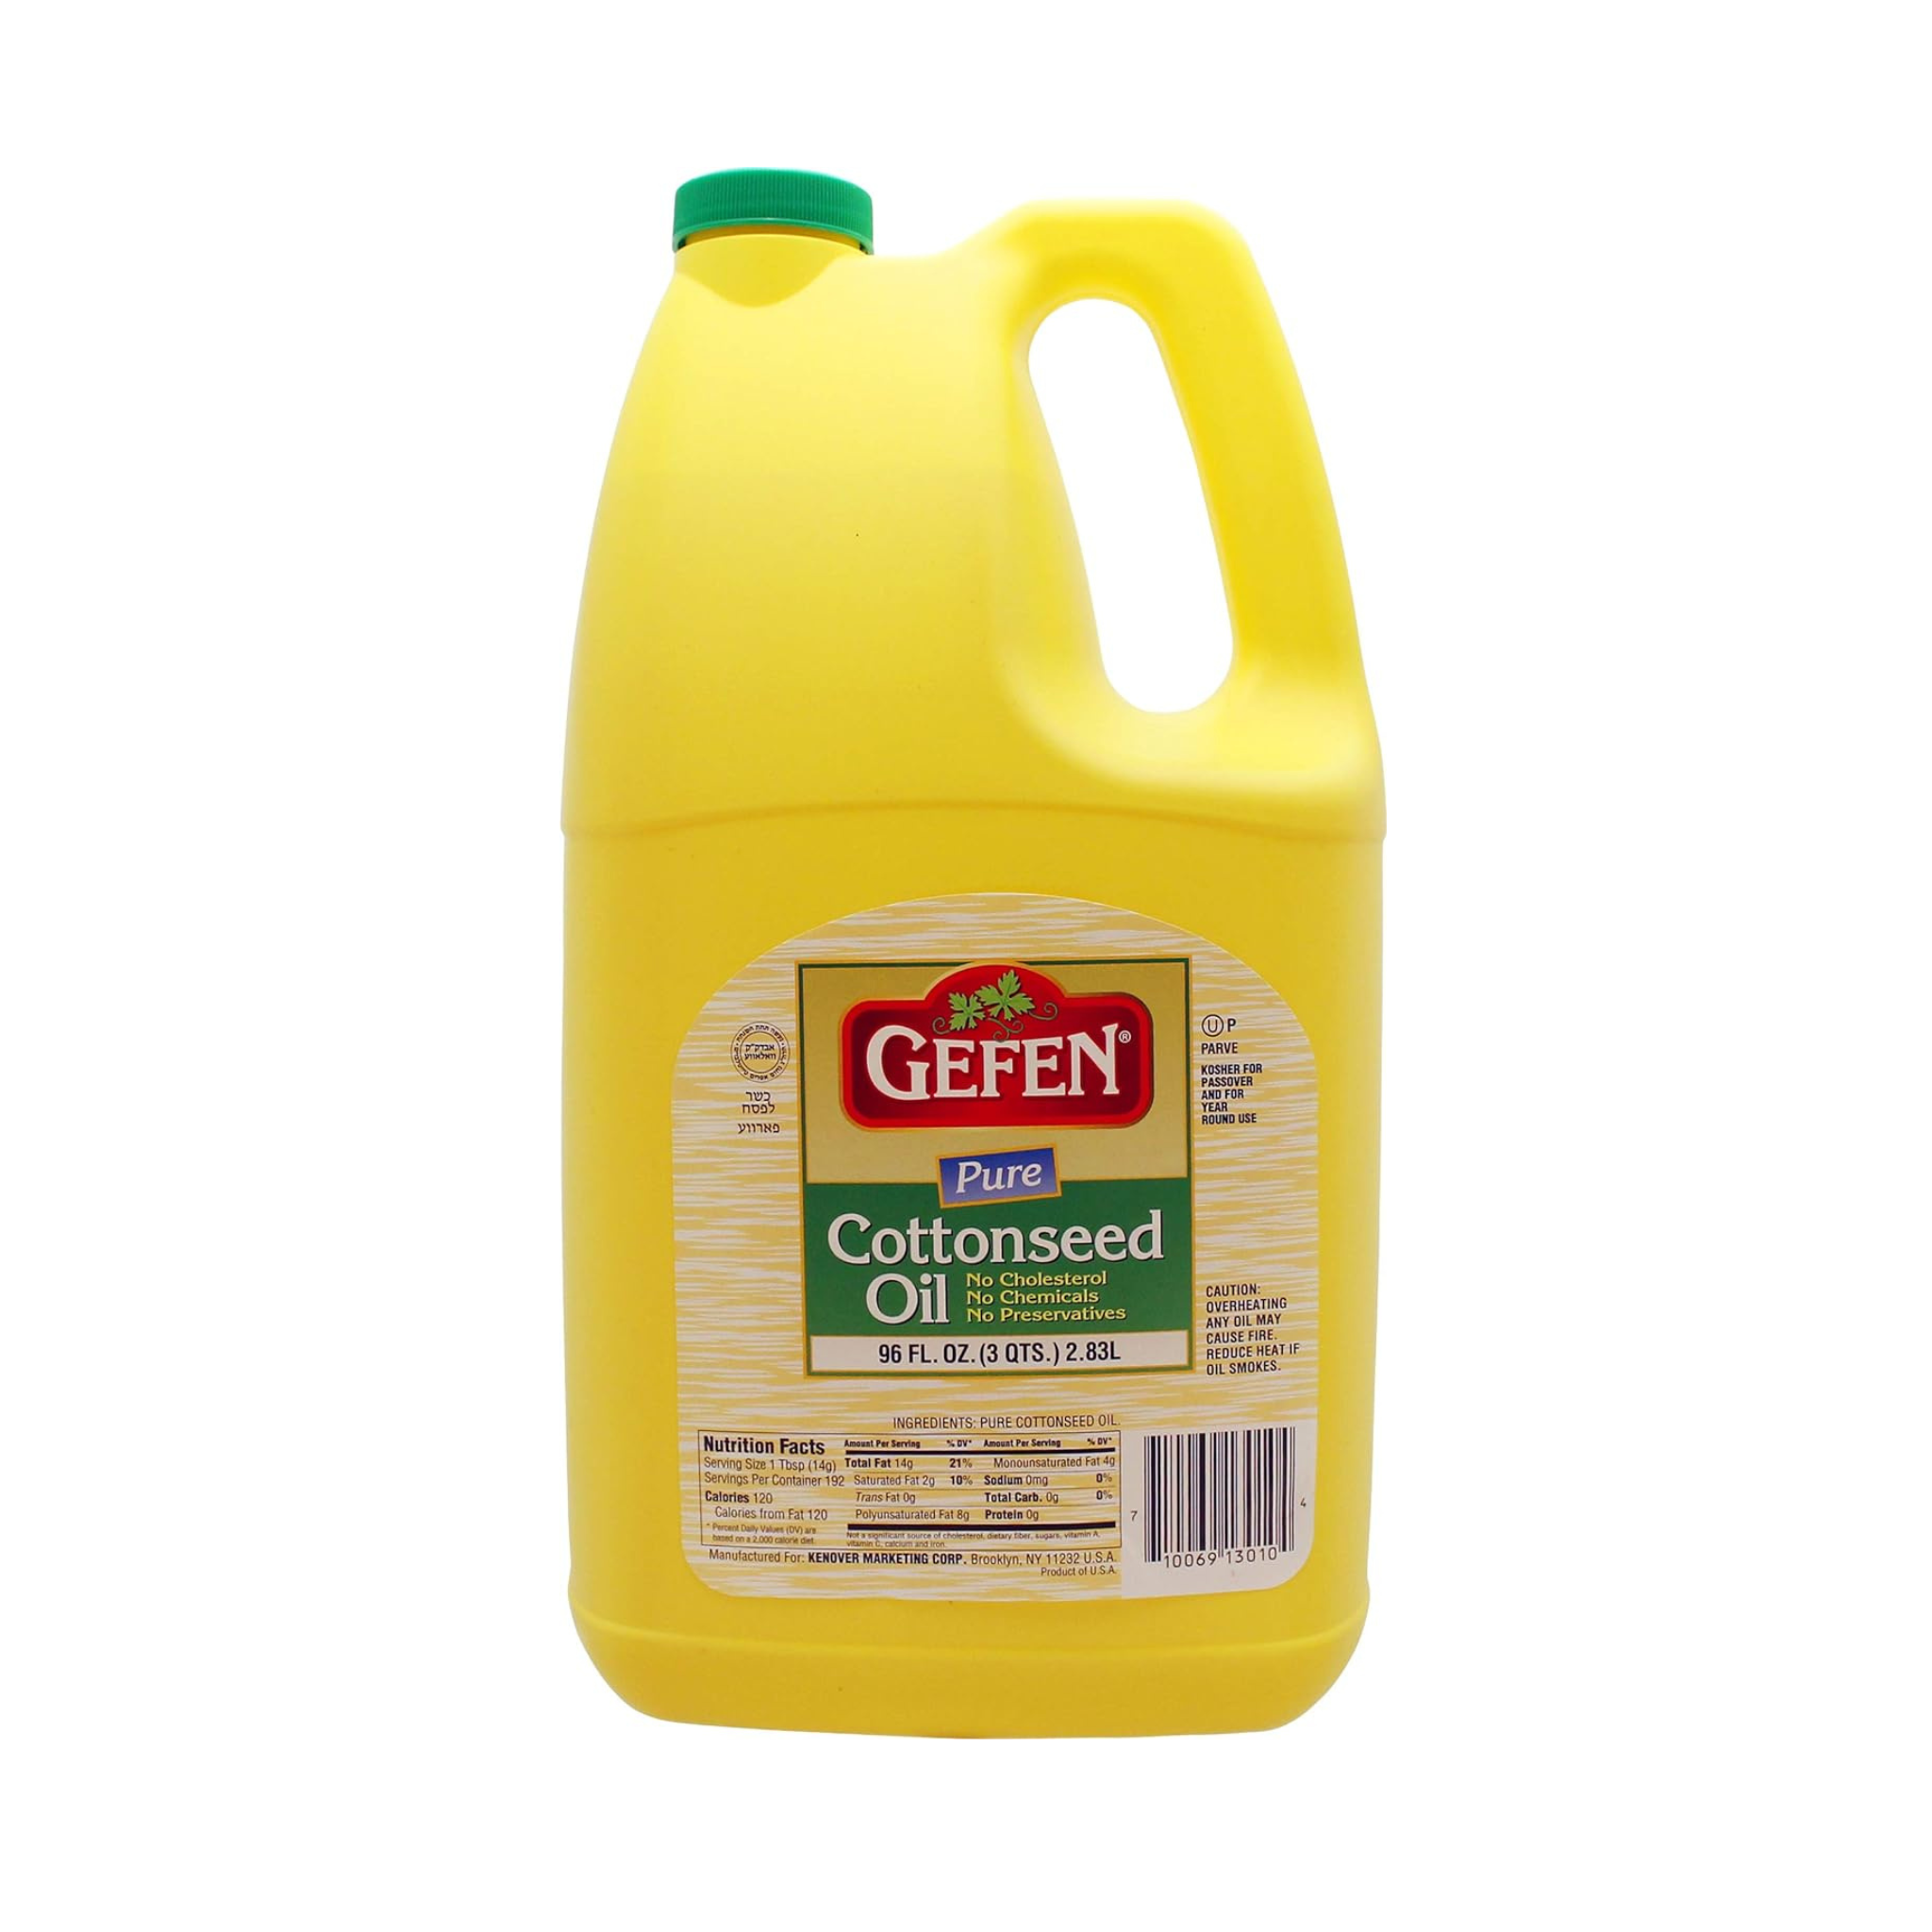 Gefen Pure Cottonseed Oil, OU Passover